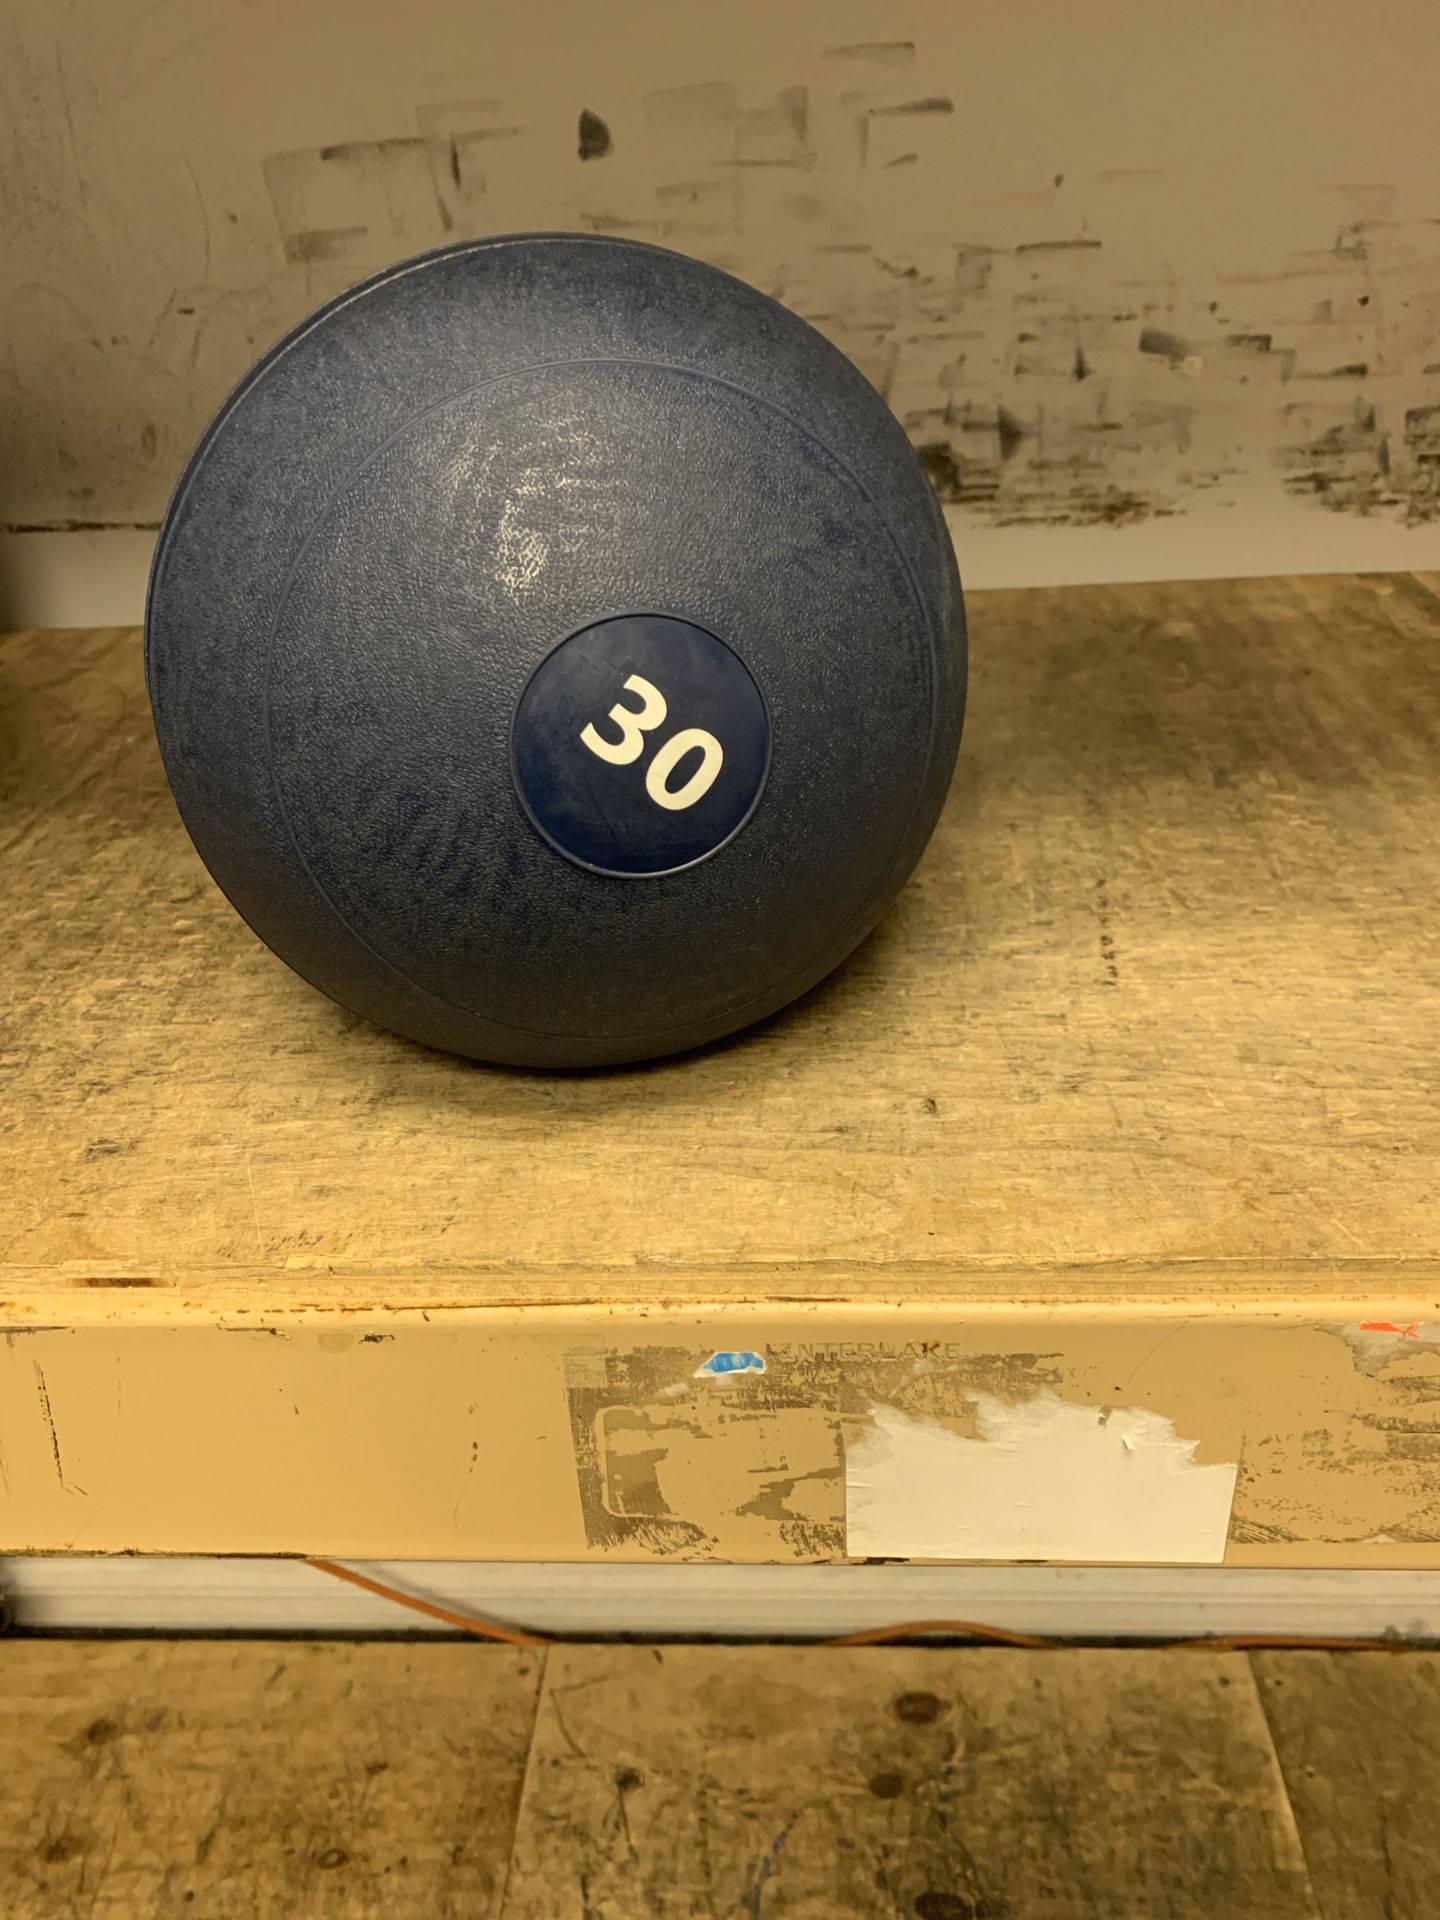 30 lb slam ball. I have 3 to sell. $60 each cash and carry